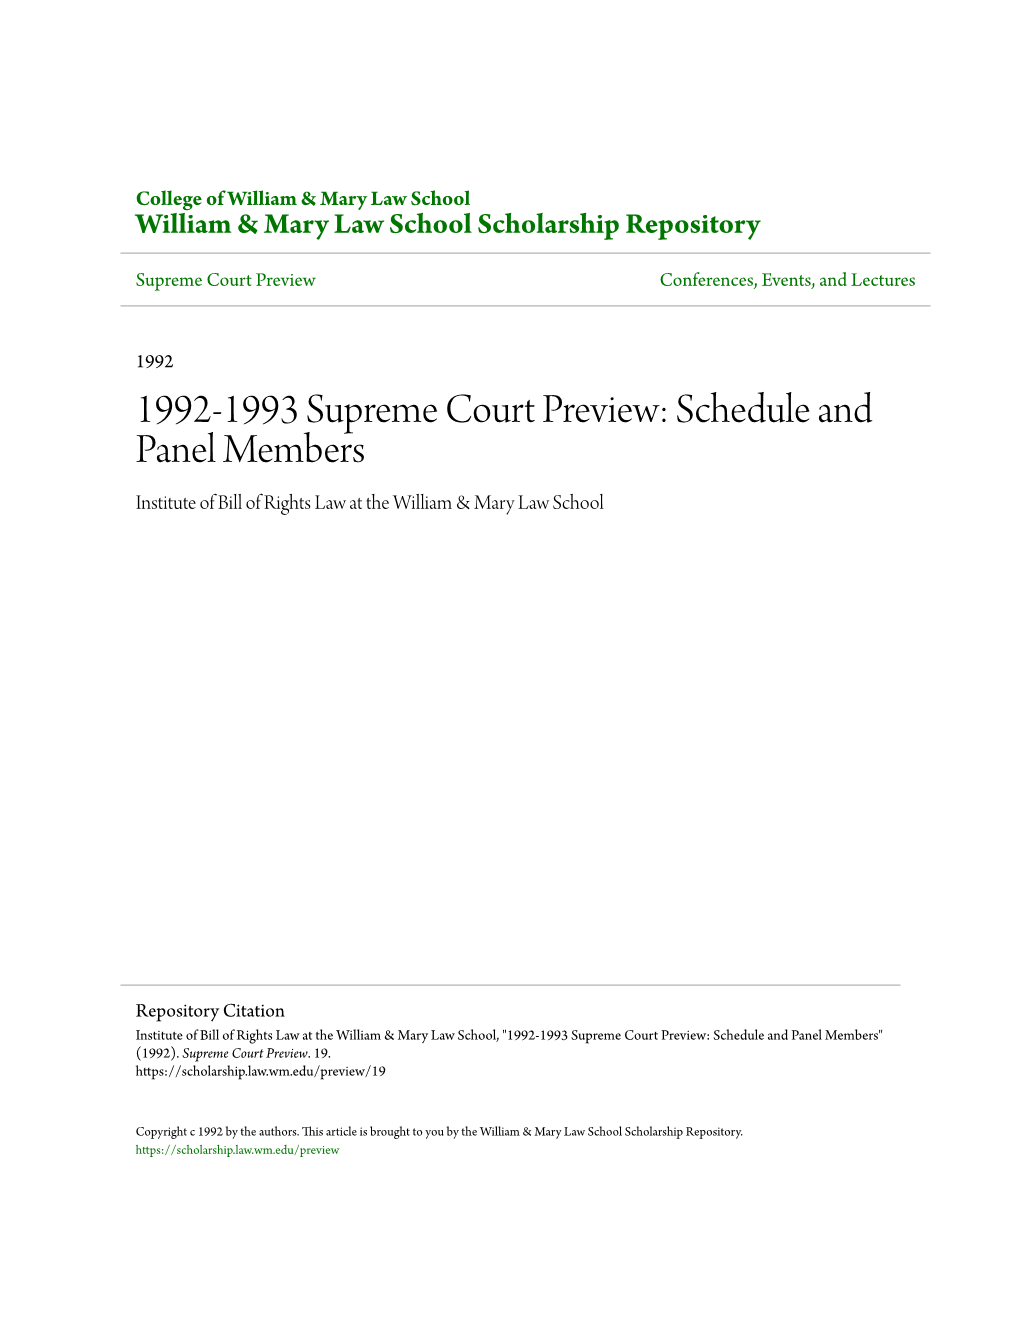 1992-1993 Supreme Court Preview: Schedule and Panel Members Institute of Bill of Rights Law at the William & Mary Law School